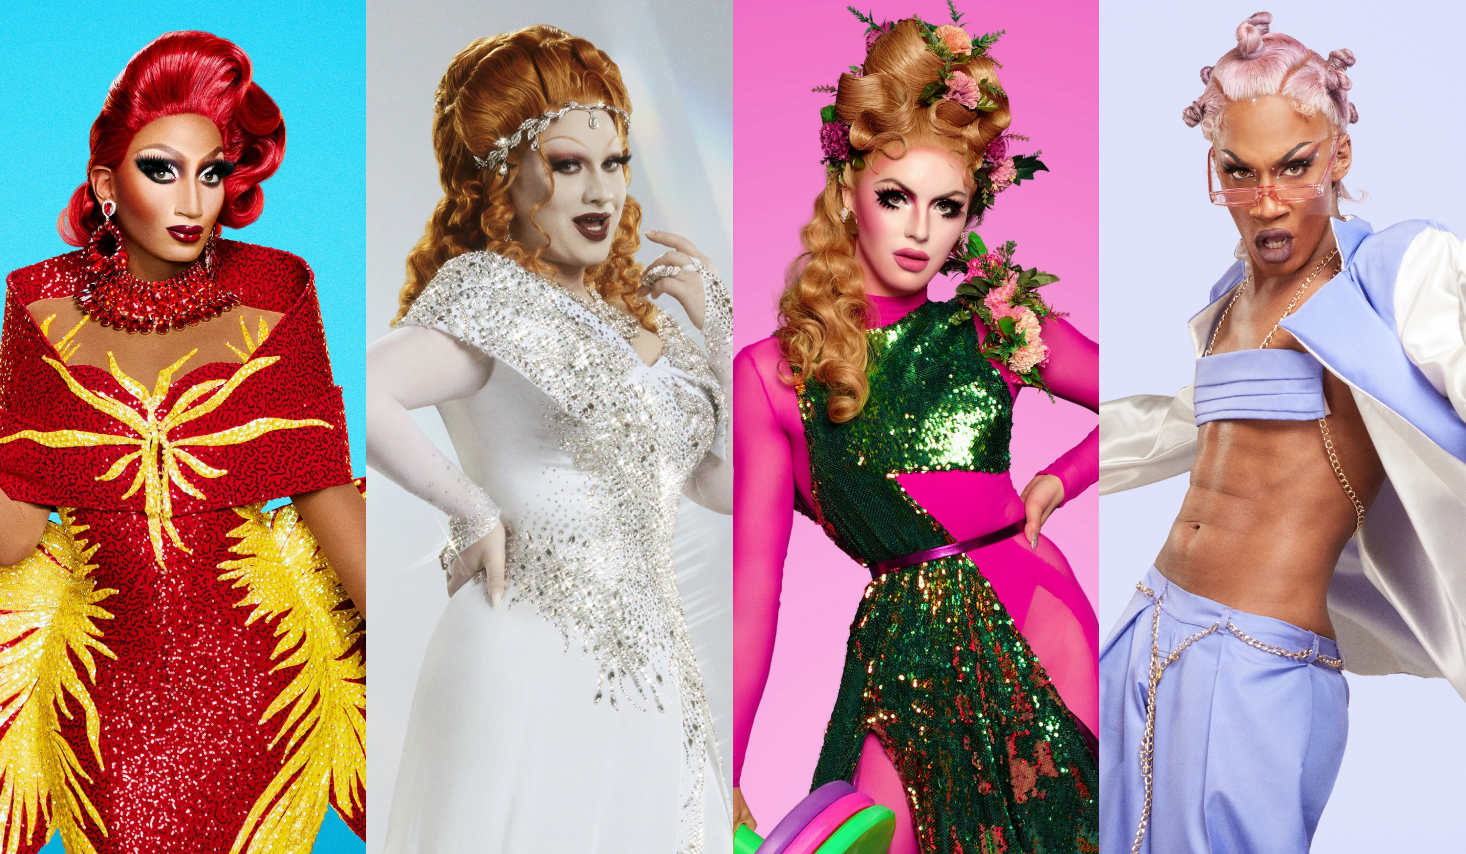 First look at Drag Race Brasil as cast is announced